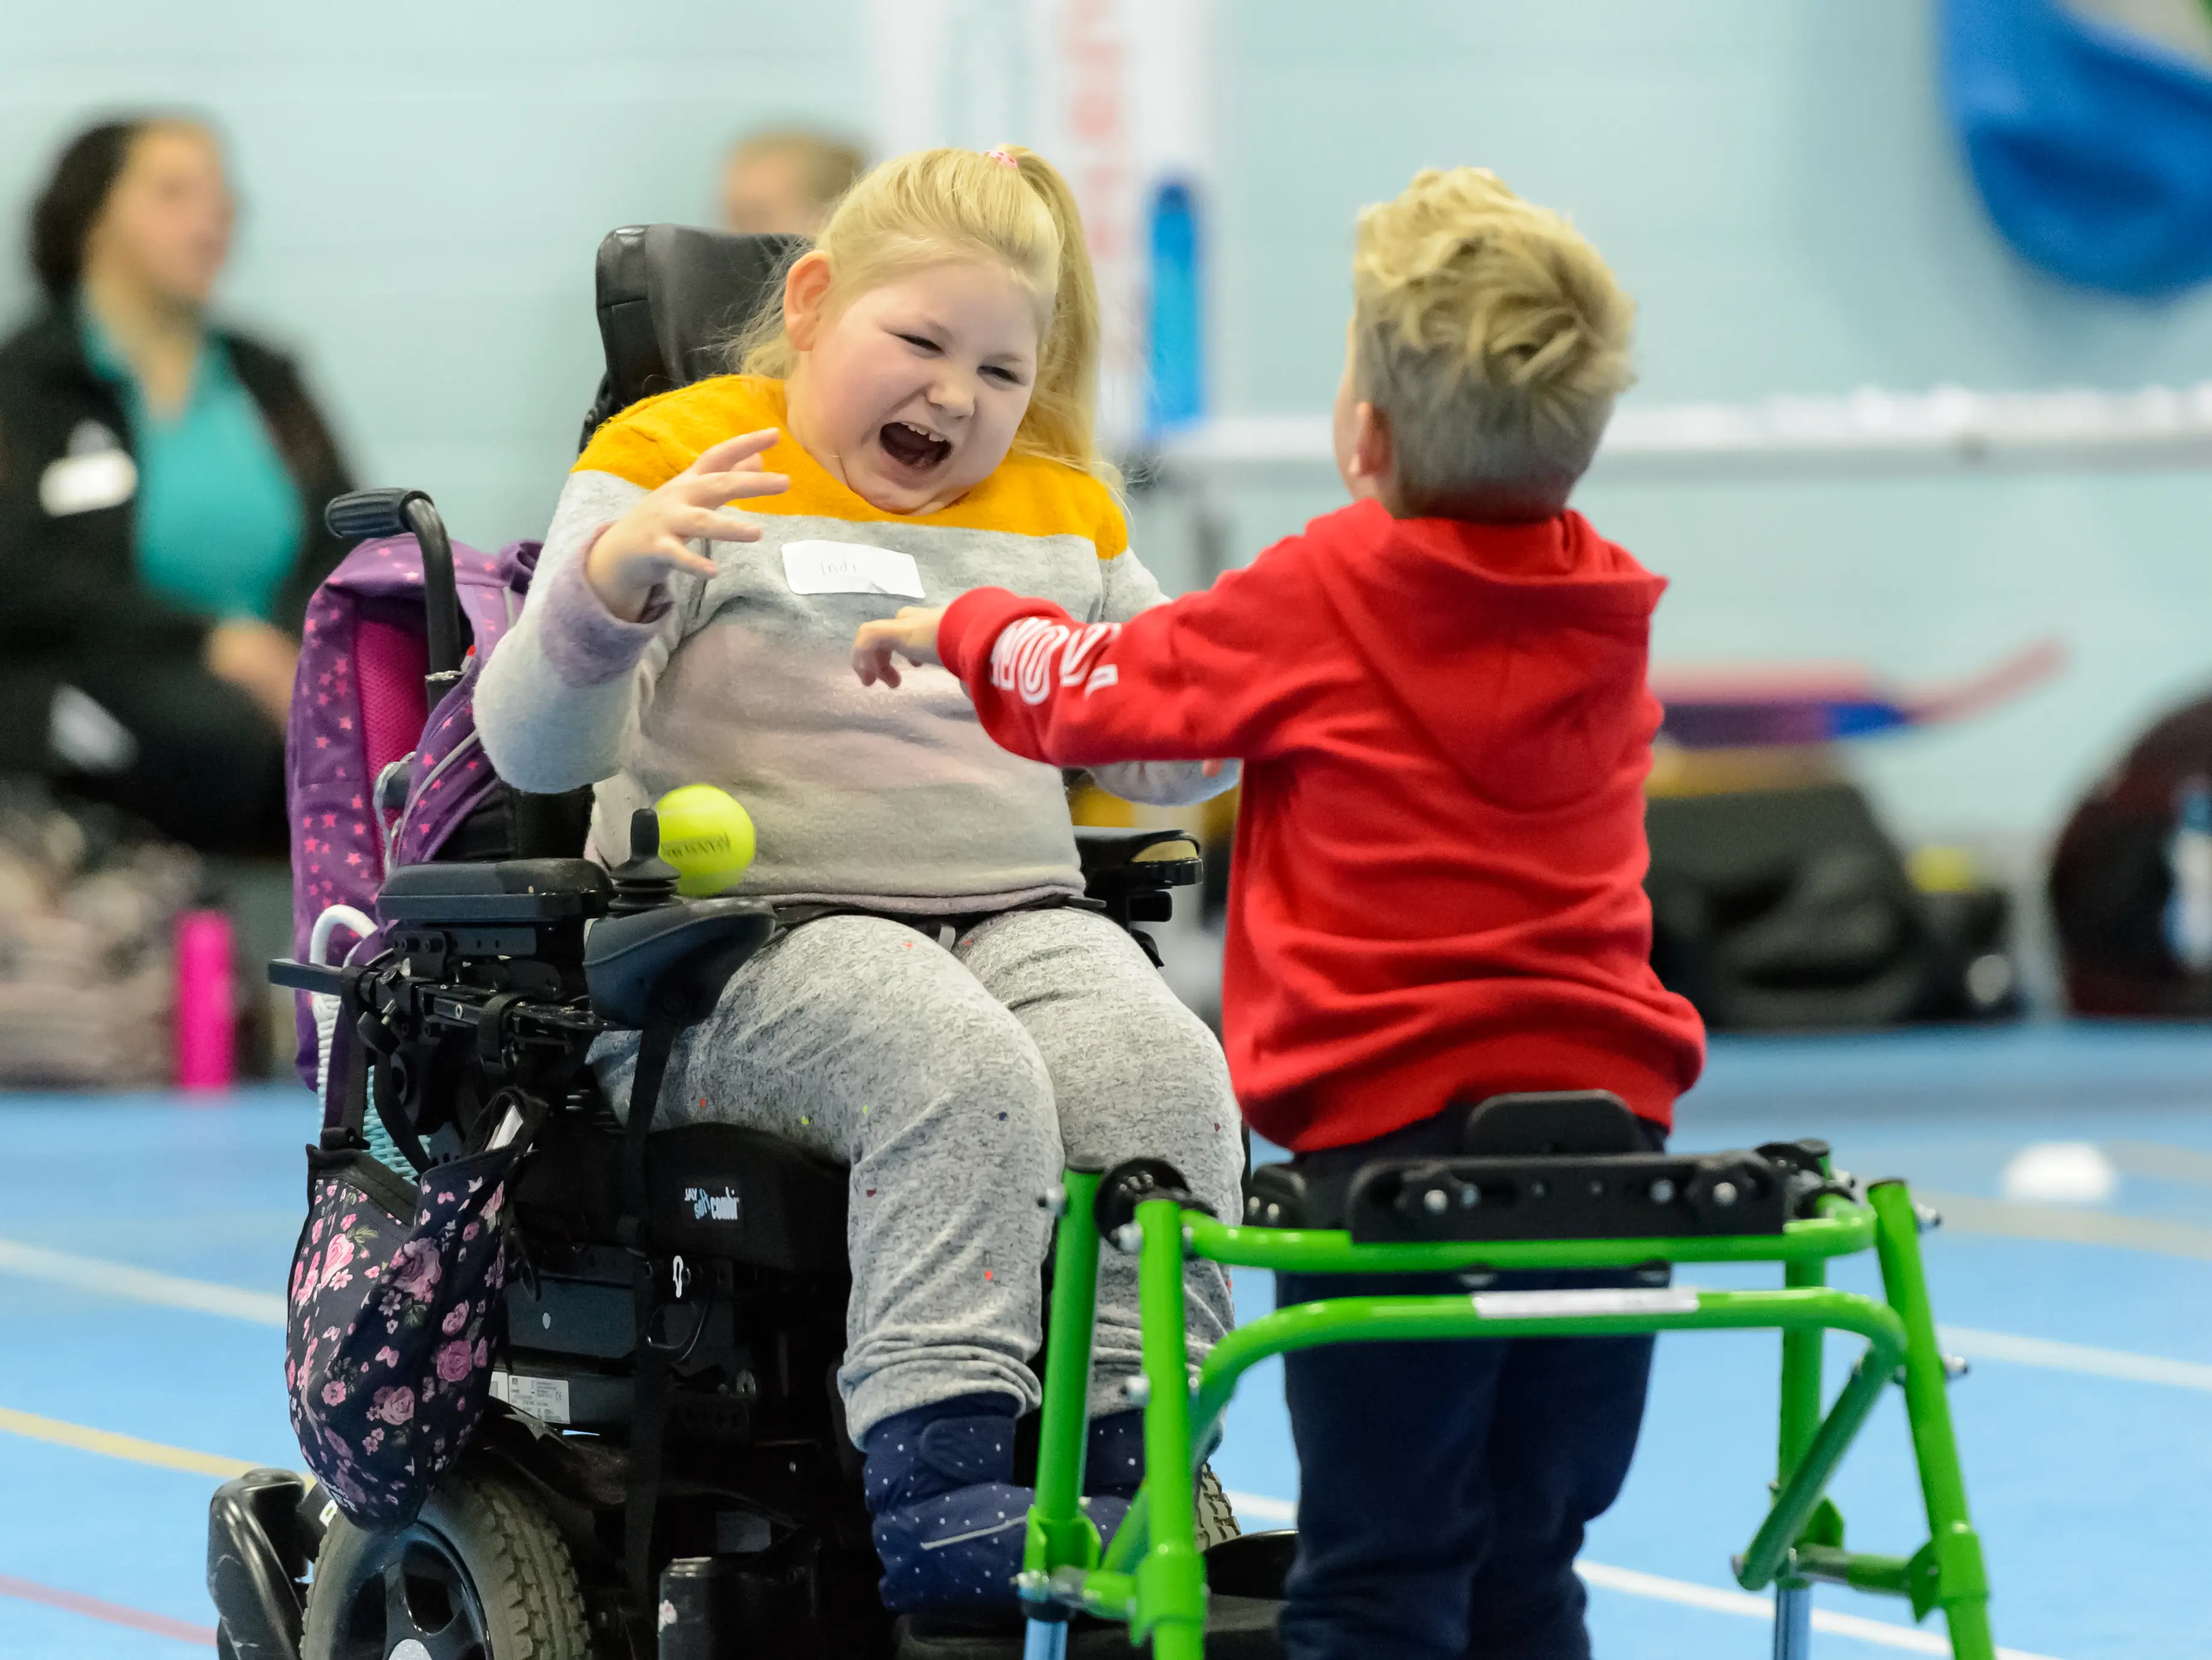 Young girl in a powered wheelchair laughing and young boy using a walking frame throwing a tennis ball to her